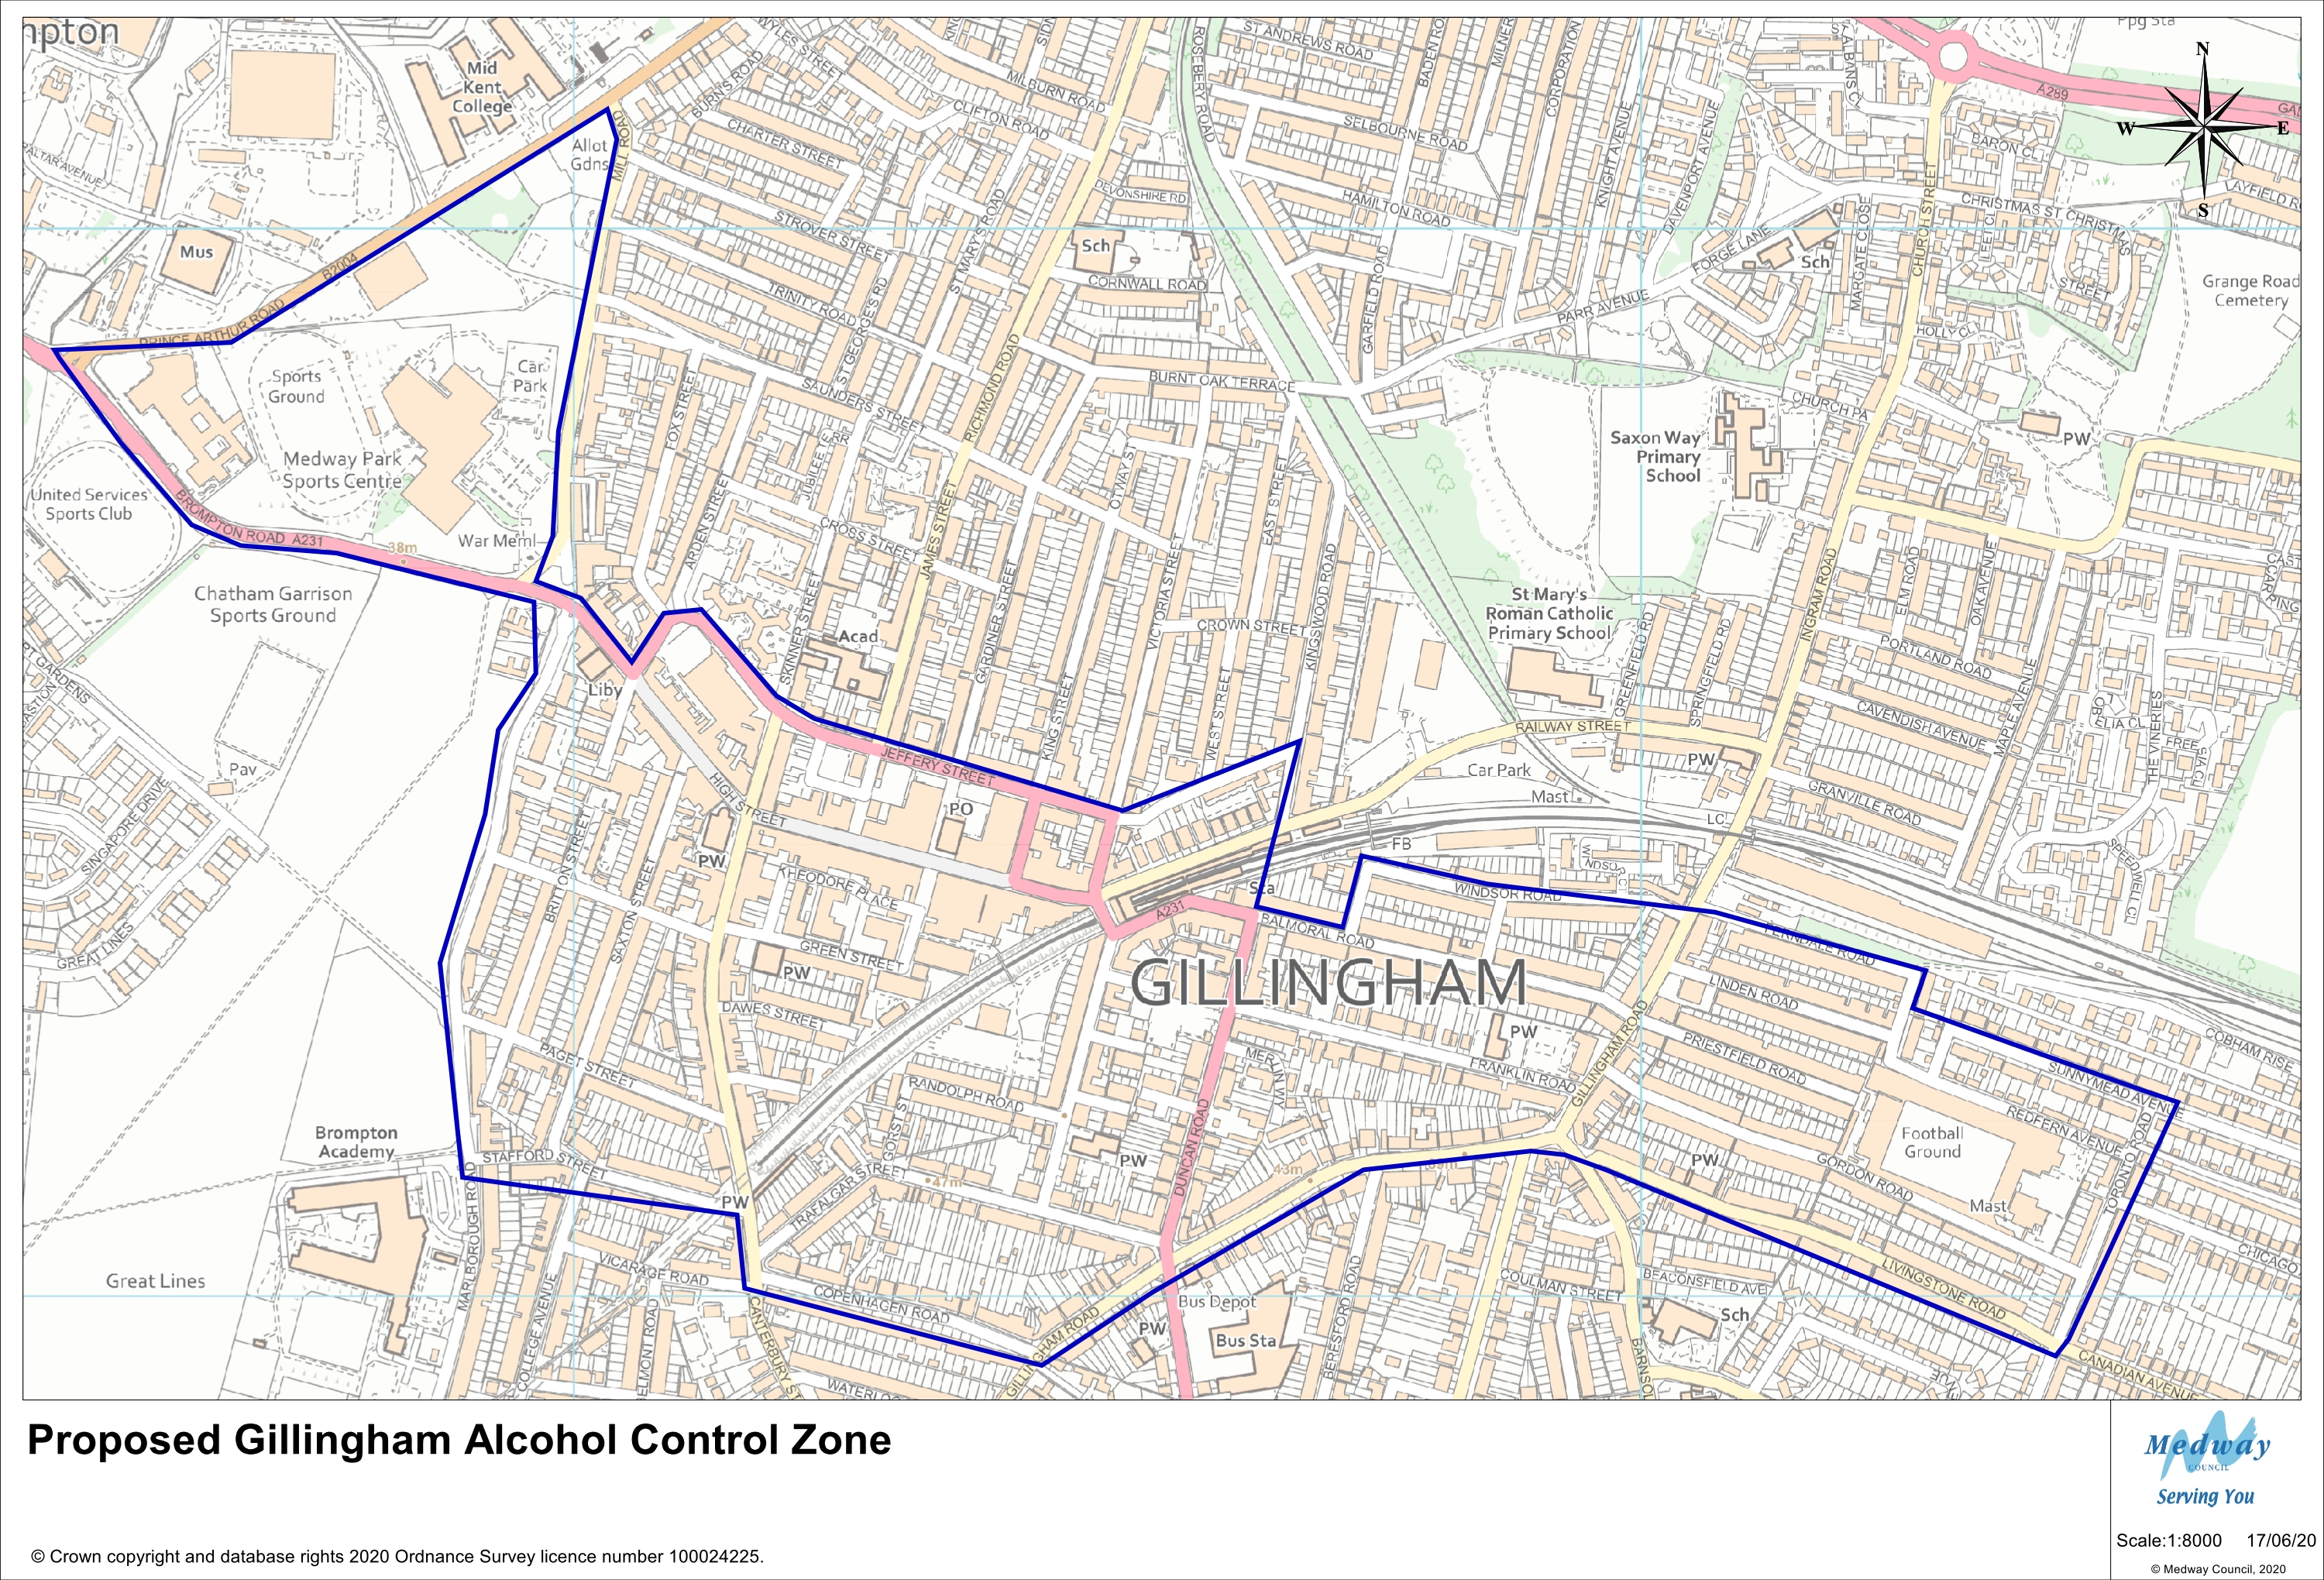 The proposed Gillingham Alcohol Control Zone covers Gillingham Town Centre and the areas extending out to Gillingham Football Ground to the east and Medway Park to the west. Starting at the junction between Brompton Road (A231) and Prince Arthur Road to Mill Road covering Medway Park leisure centre. The proposed zone moves along High Street and Jeffery Street to Kingswood Road before crossing the railway line to Balmoral Road, Avondale Road and then along Windsor Road. The zone crosses Gillingham Road and proceeds along Ferndale Road Sunnymead Avenue to Toronto Road. The proposed zone then proceeds west along Livingstone Road and Gillingham Road to Copenhagen Road and Stafford Street. The proposed zone heads north along Marlborough Road to Brompton Road (A231).